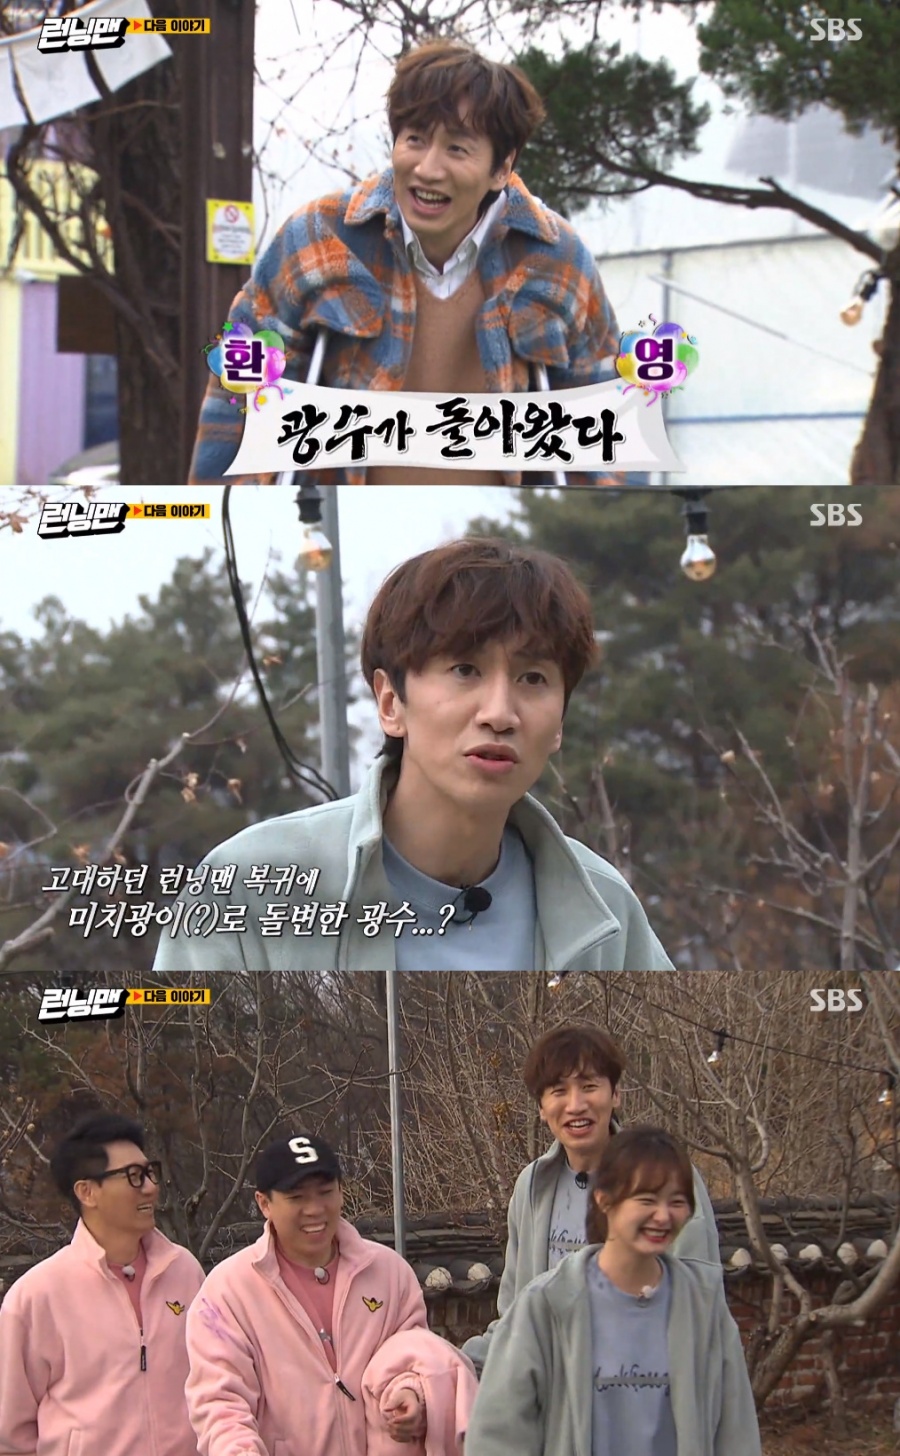 Actor Lee Kwang-soo returns to the set of Running ManLee Kwang-soo, a member of the agency King Kong by Starship, said, Lee Kwang-soo recently resumed shooting Running Man.Lee Kwang-soo was in contact with a signal-breaking vehicle last month; diagnosed with a fractured right ankle in the accident, he has been on surgery and resting.Lee Kwang-soo, who devoted himself to treatment for a few weeks and suspended all schedules, recently returned to filming Running Man and met members.Lee Kwang-soo appeared on the next trailer of Running Man broadcast on the 15th and delighted viewers.Lee Kwang-soo, who returned with the word return of giraffes, put on crutches but made him look forward to his performance in a more vibrant manner than before surgery.I have improved a lot, but it is not a perfect recovery. It is better than the beginning, but I have to continue to receive treatment.We started filming Running Man, but we cant run or move violently; we will continue to be careful for recovery, he said.Lee Kwang-soo is said to have returned to the set somewhat faster than scheduled due to his affection for Running Man.He is rehabilitating on crutches and will be treated and filmed for the time being.=